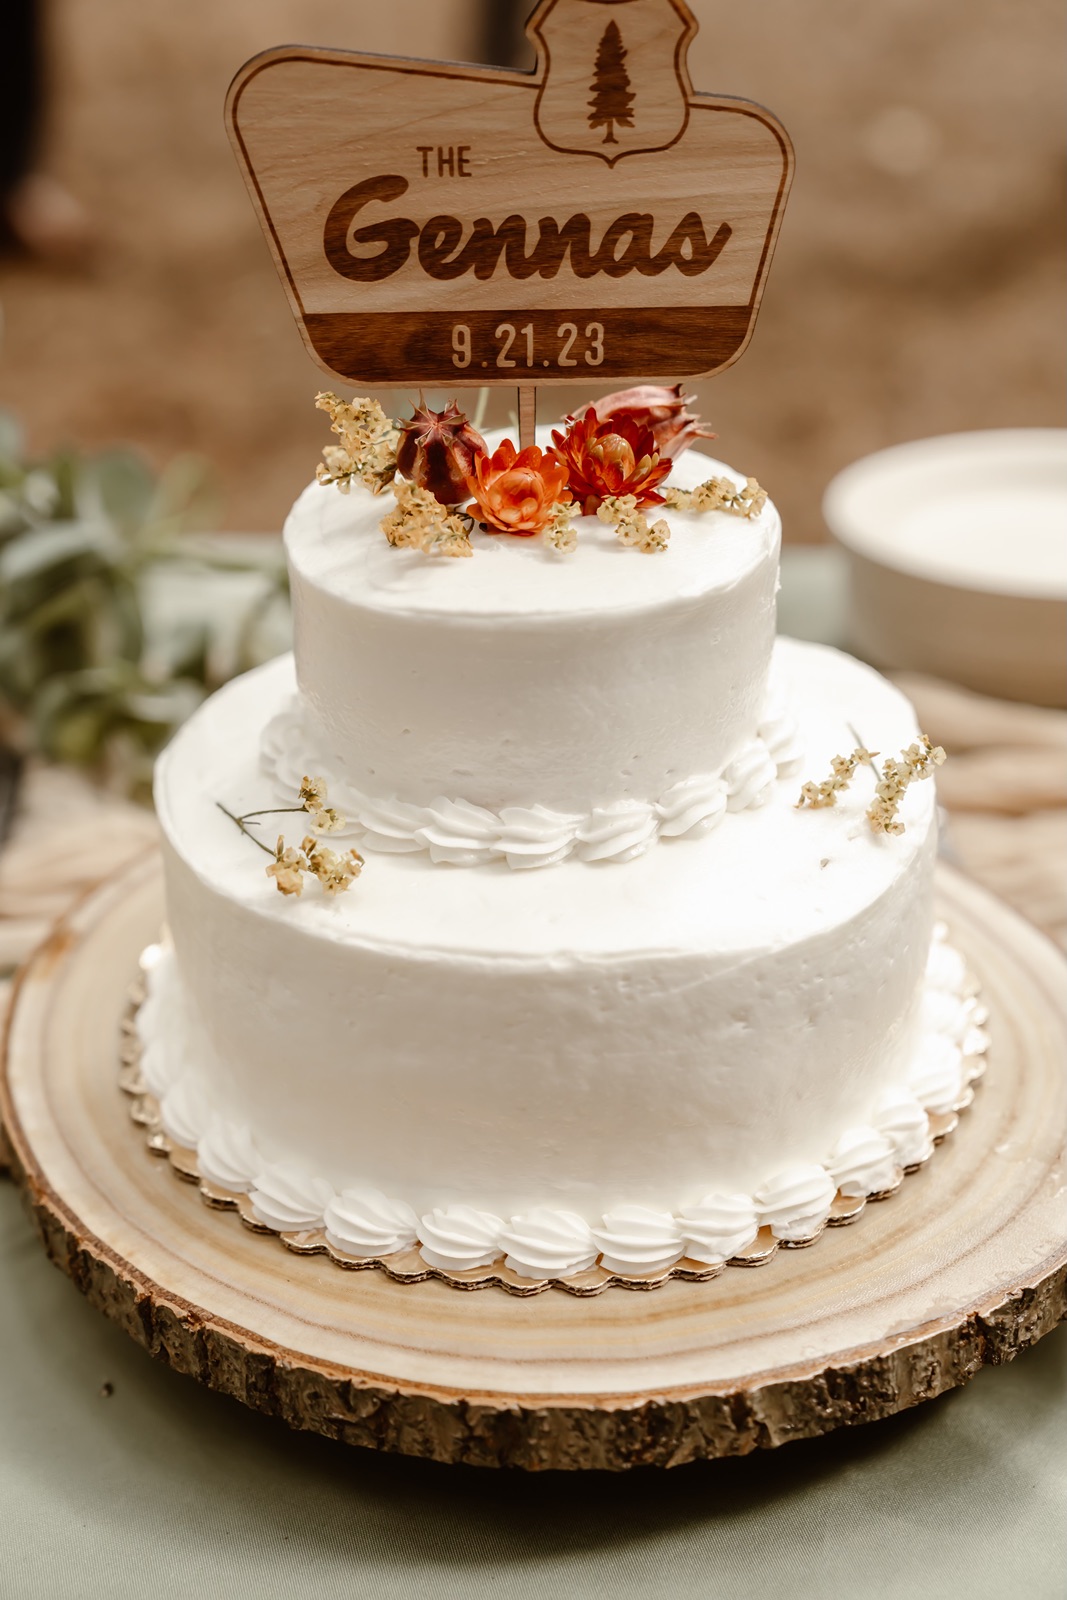 Two-tier wedding cake that the couple cut at their Cathedral Beach Yosemite wedding reception